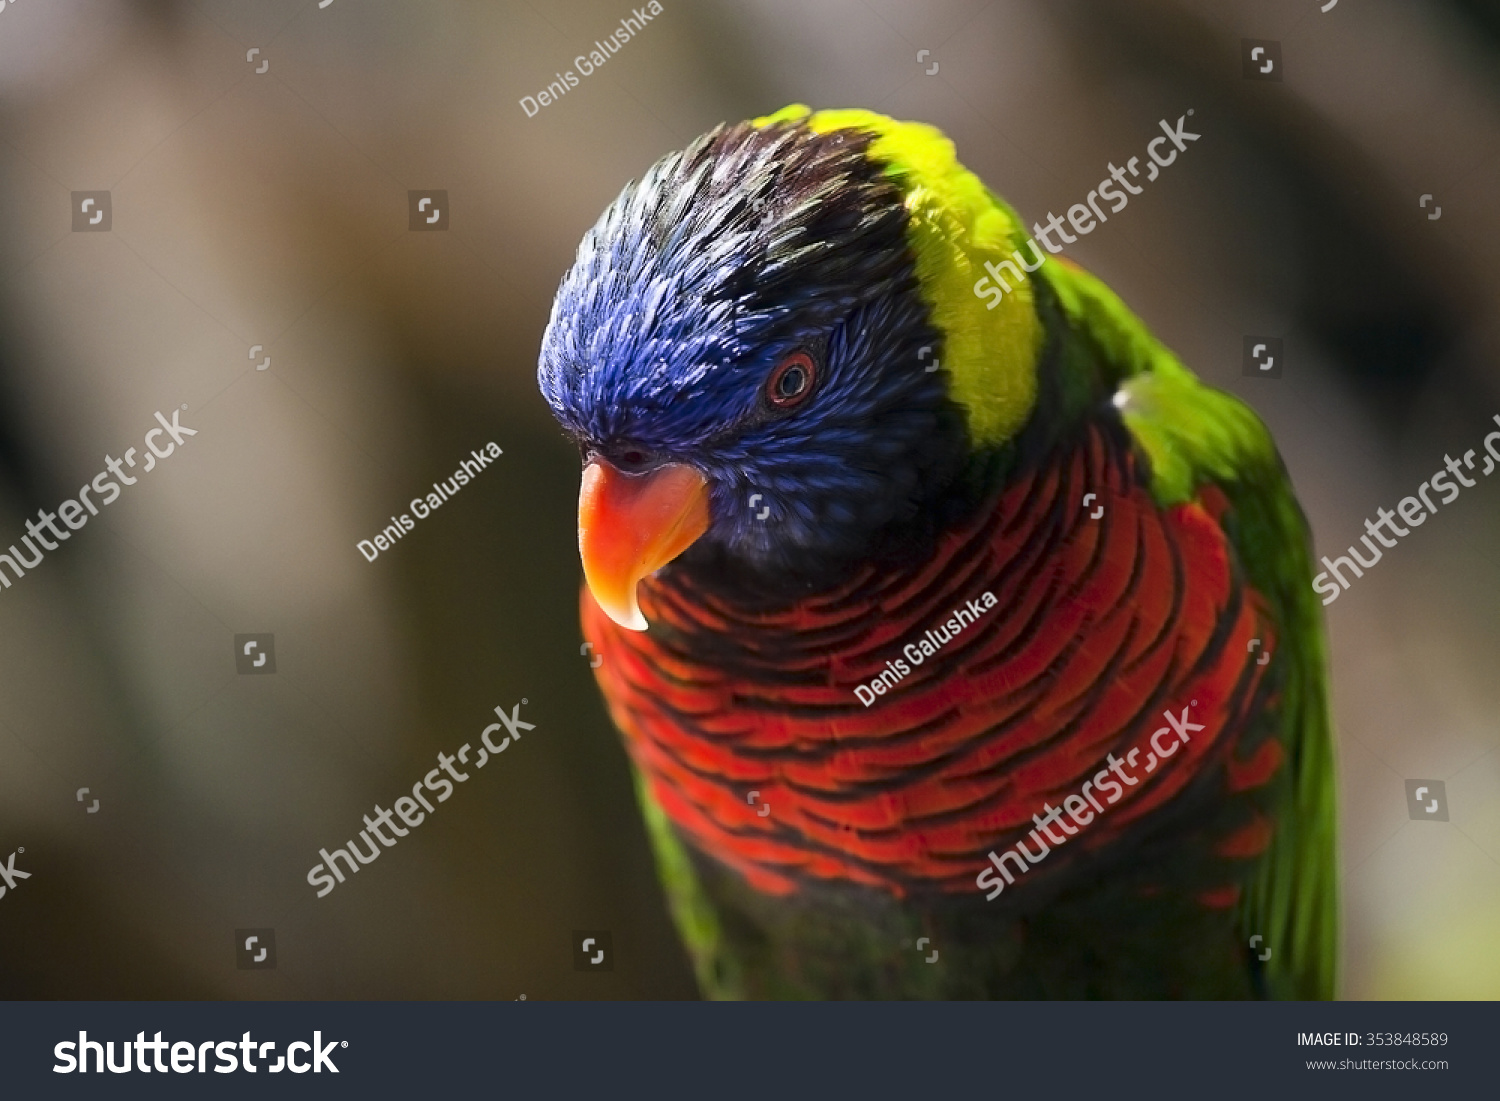 Lory parrot at the zoo #353848589